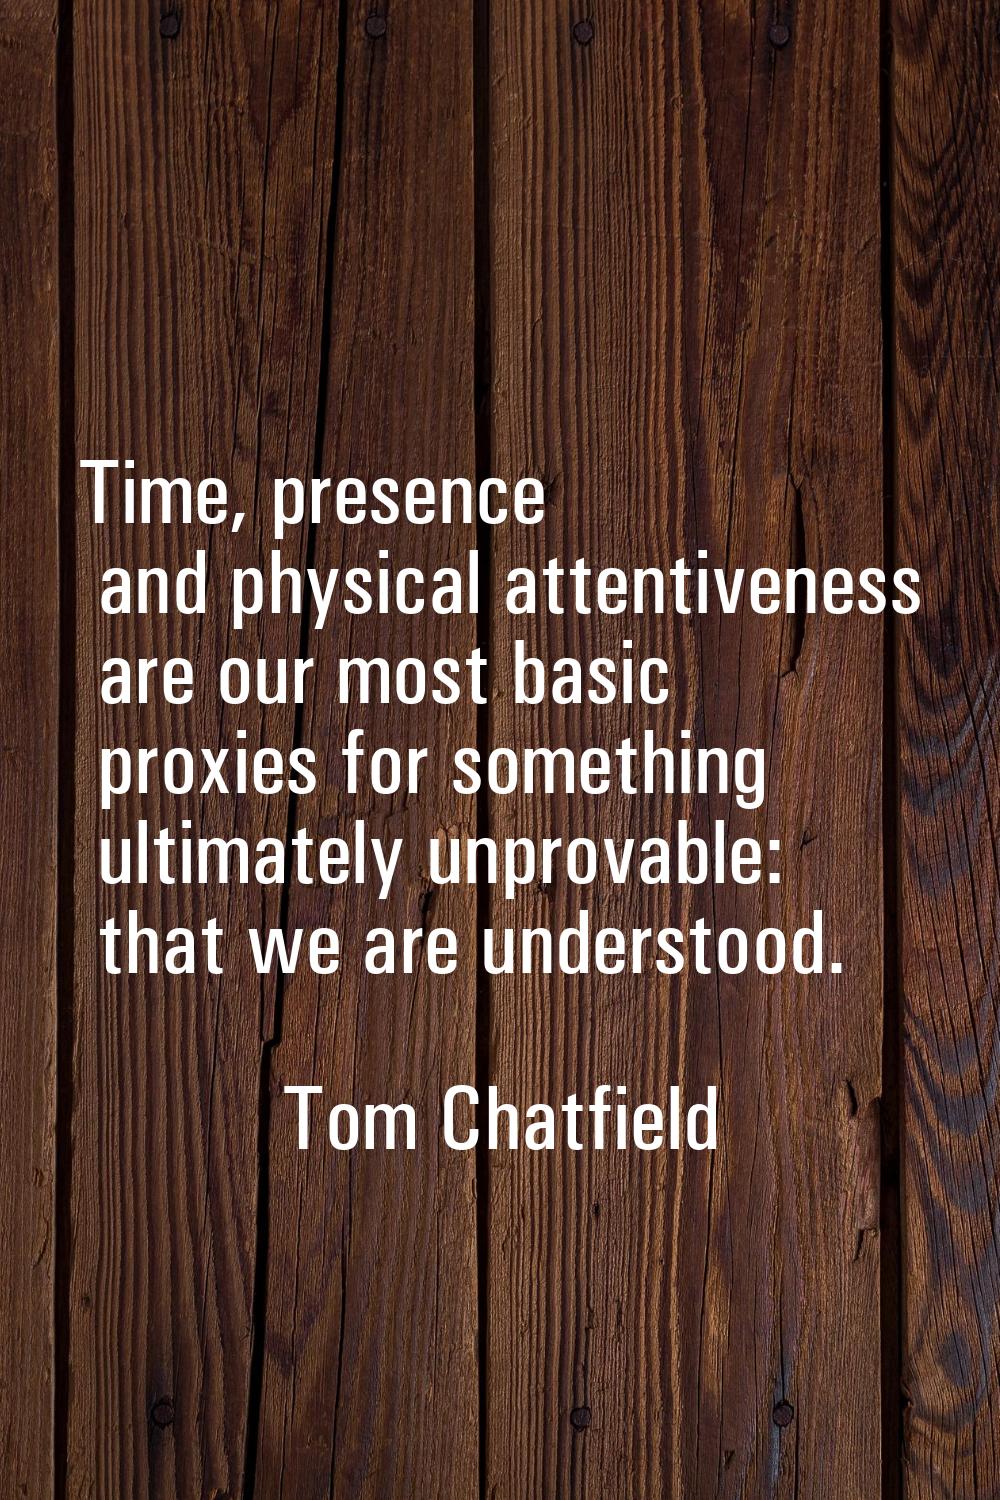 Time, presence and physical attentiveness are our most basic proxies for something ultimately unpro